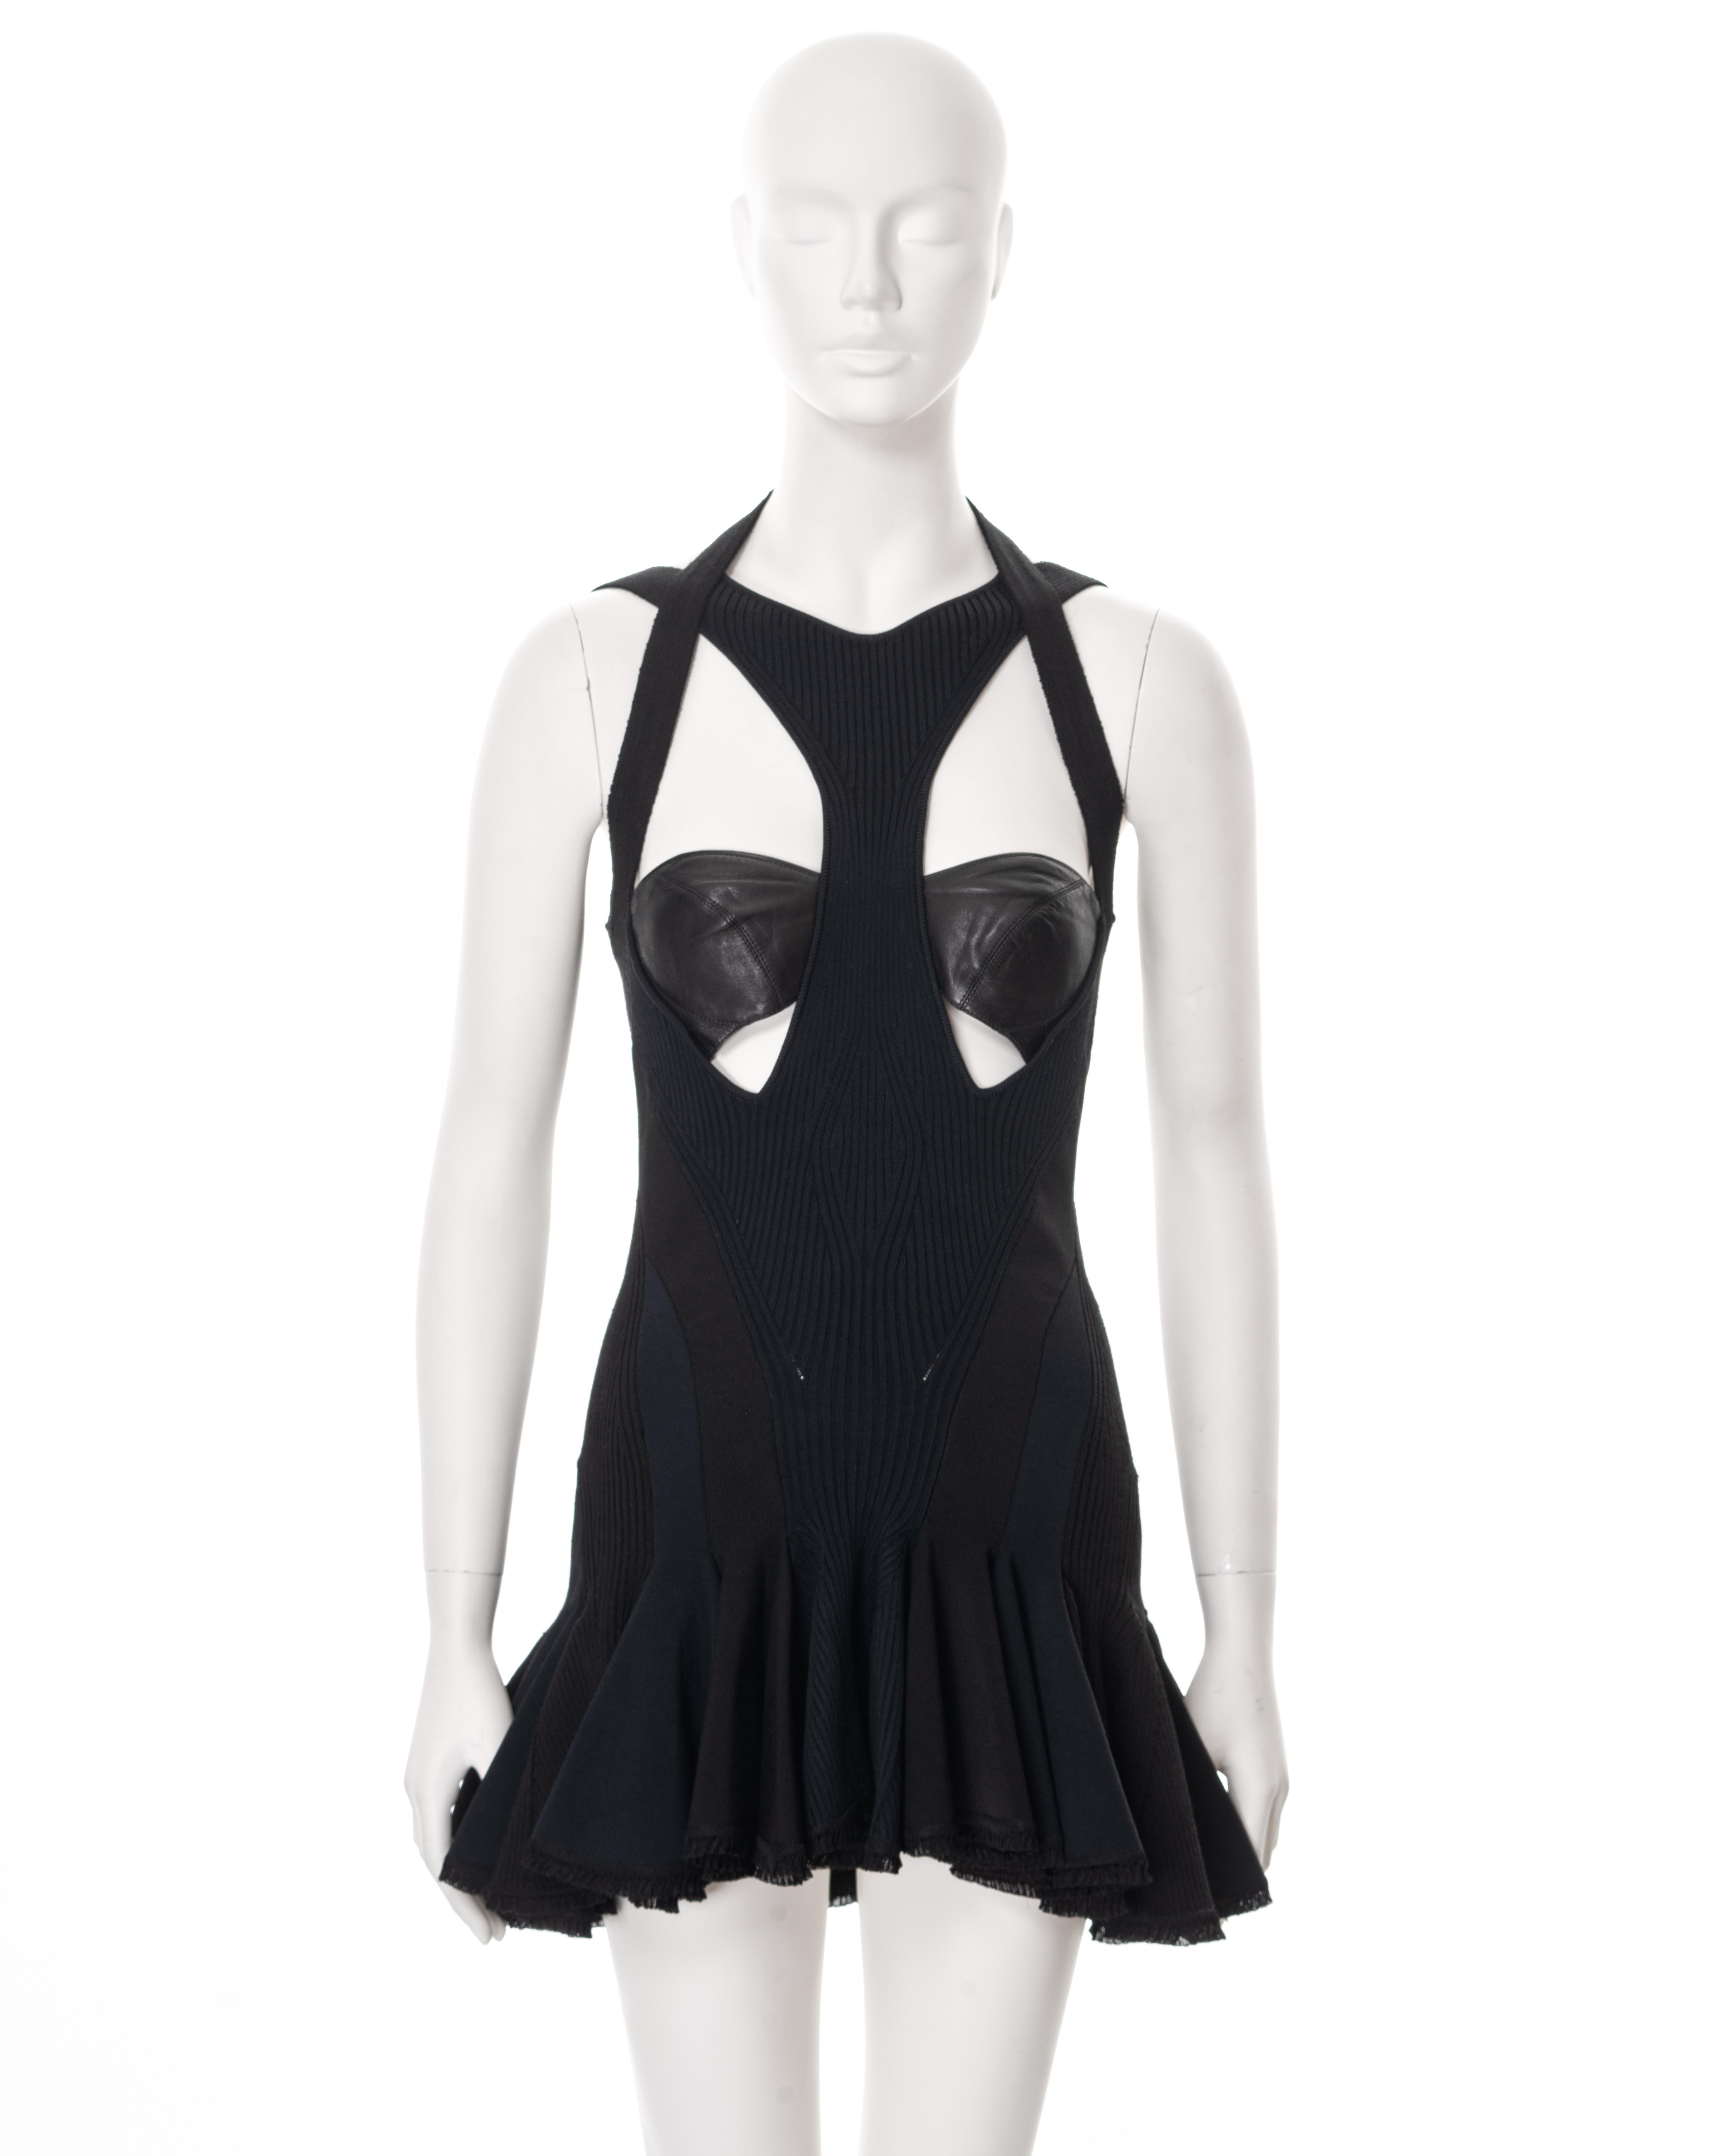 ▪ Alexander McQueen mini dress
▪ Spring-Summer 2004 
▪ Constructed from black rib knit, spandex jersey and leather 
▪ Built-in leather bustier 
▪ Multiple criss-cross shoulder straps 
▪ Gored graduated mini skirt
▪ Size Small

All photographs in